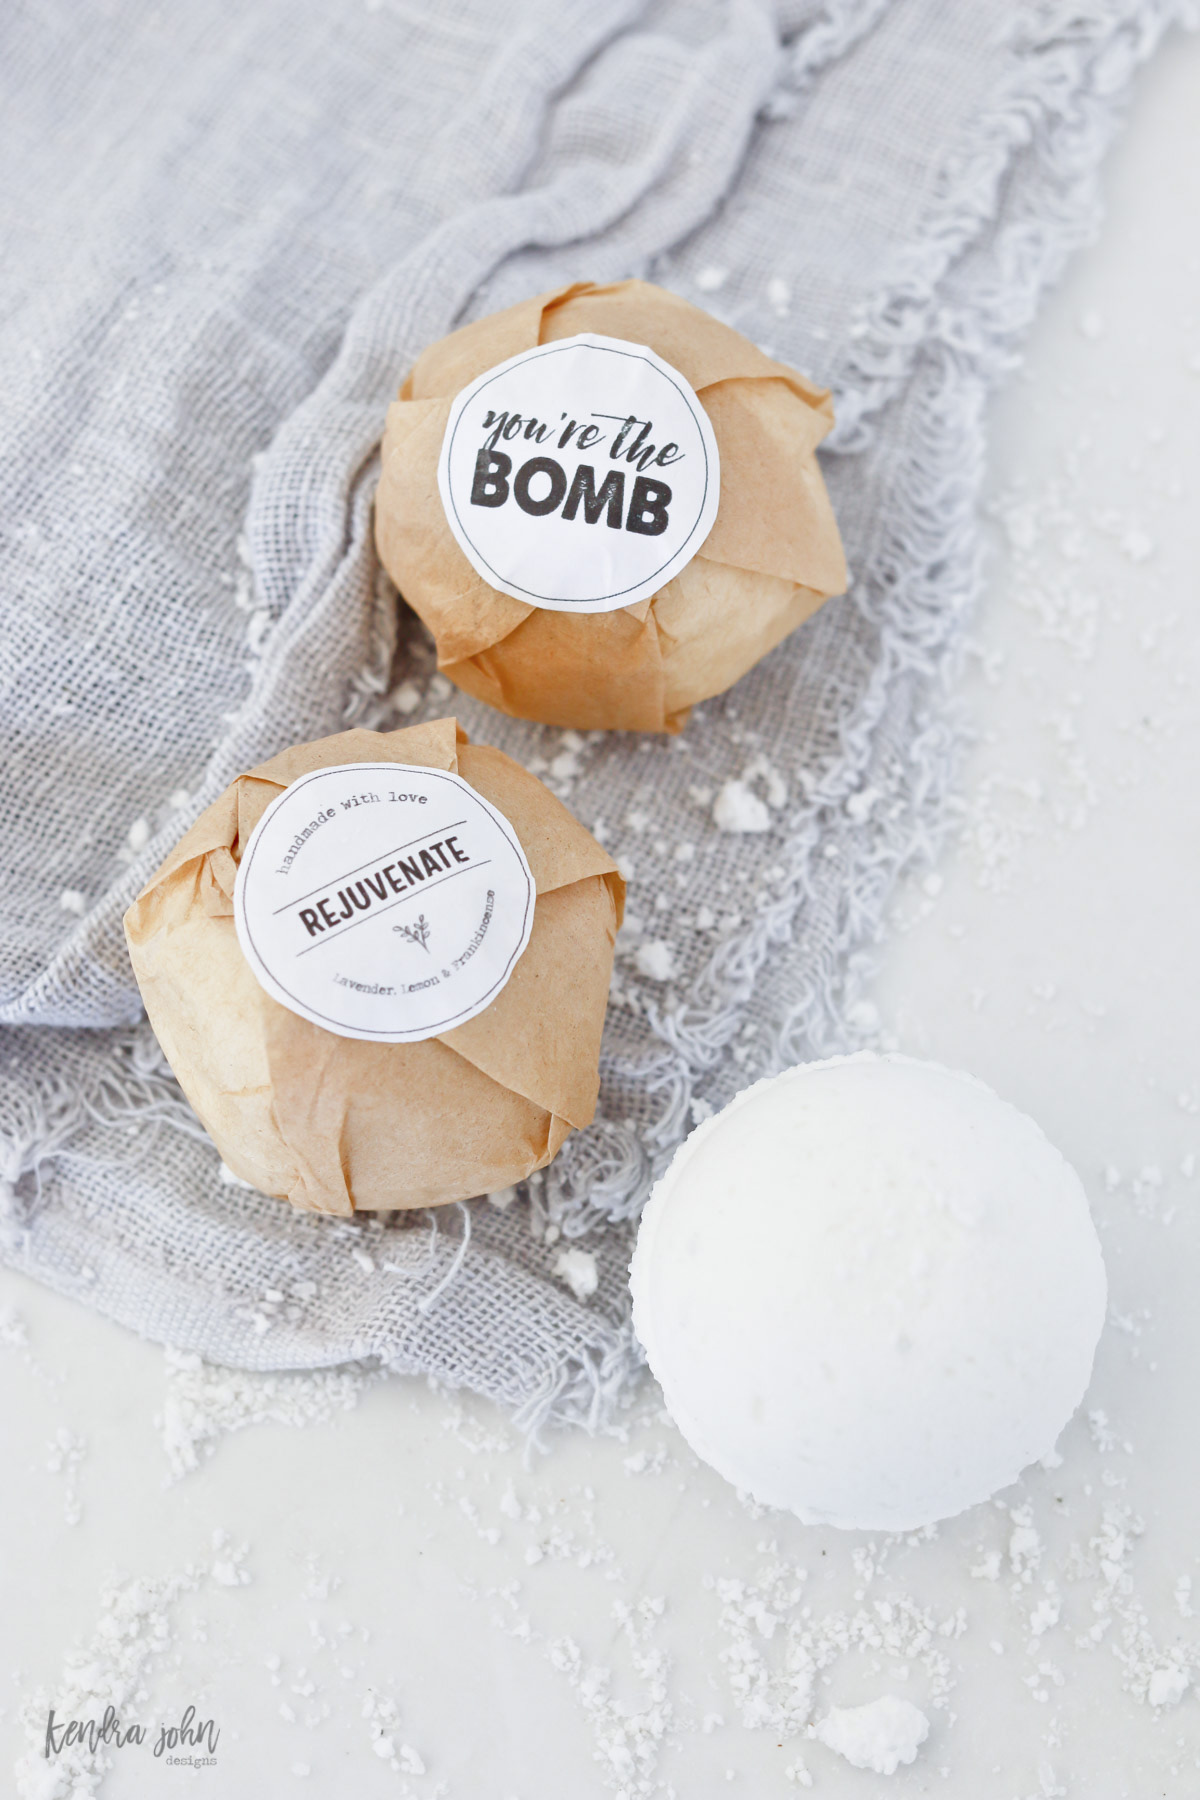 Homemade rejuvinating bath bombs with gift tags for gifts